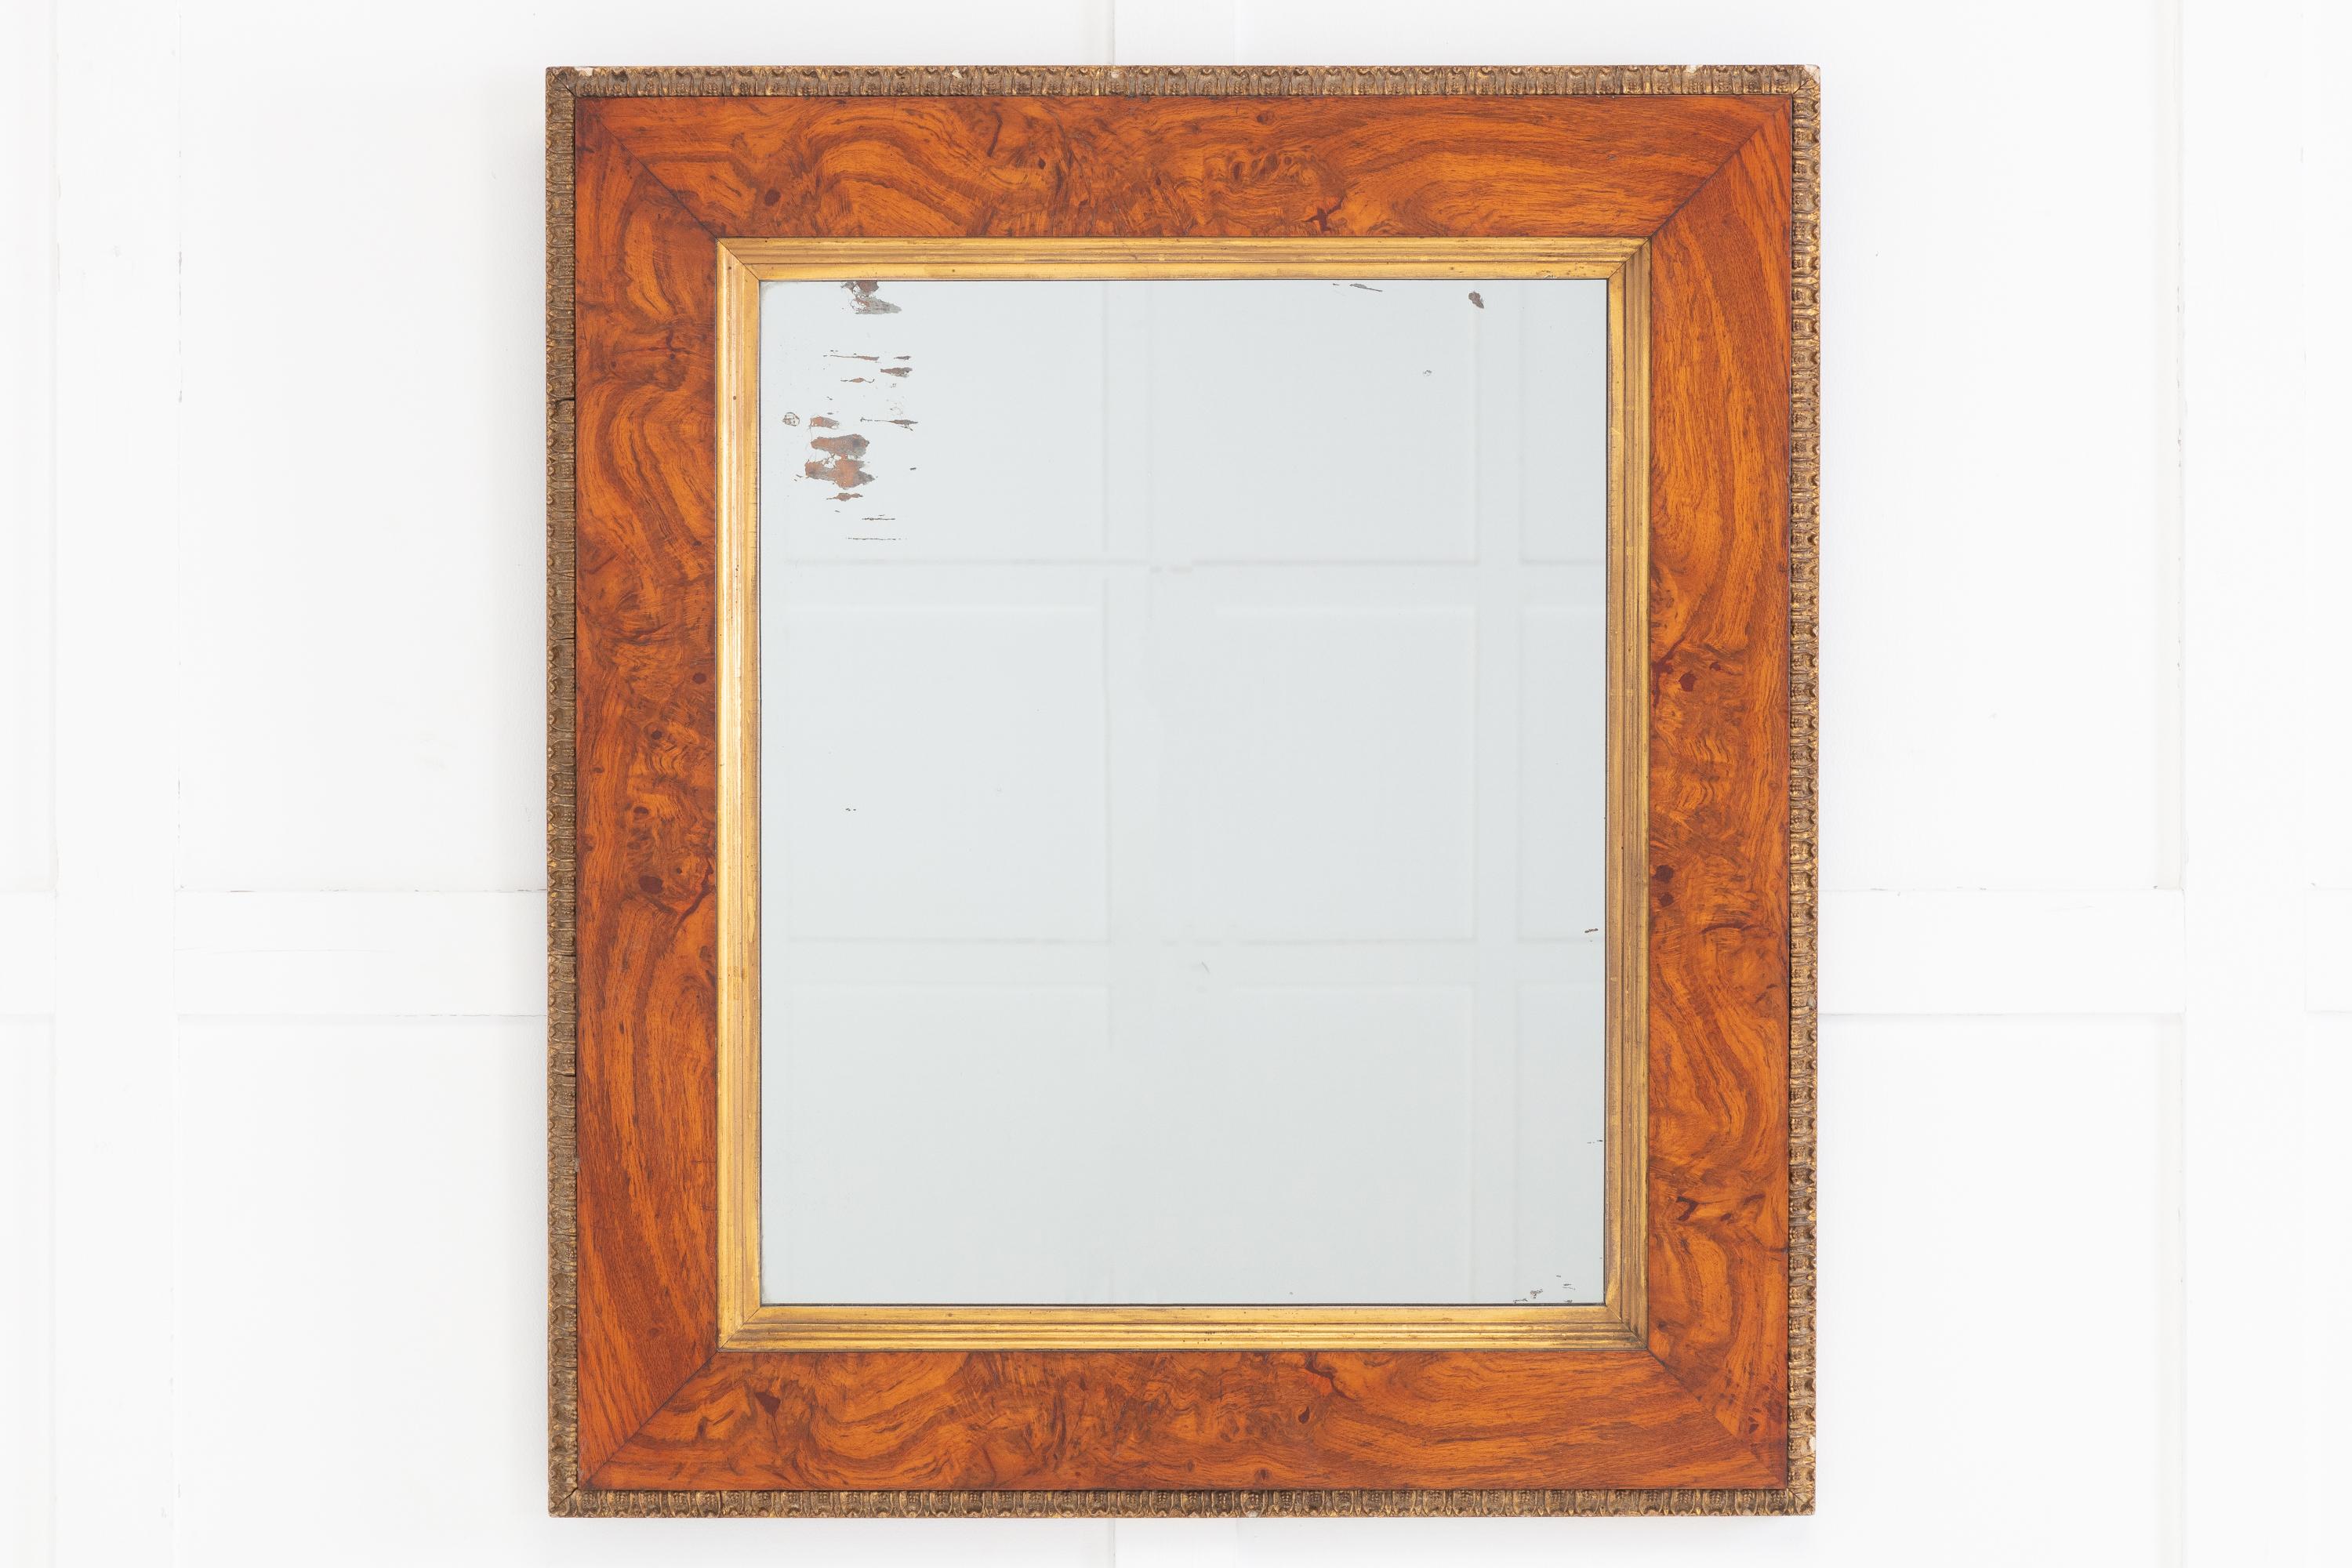 19th Century English pollard oak wall mirror of simple and elegant design, in a moulded frame with inner gilt slip and carved and gilded outer border.

Pollard oak is the wood derived from oak trees that have been ‘pollarded’. Pollarding is a